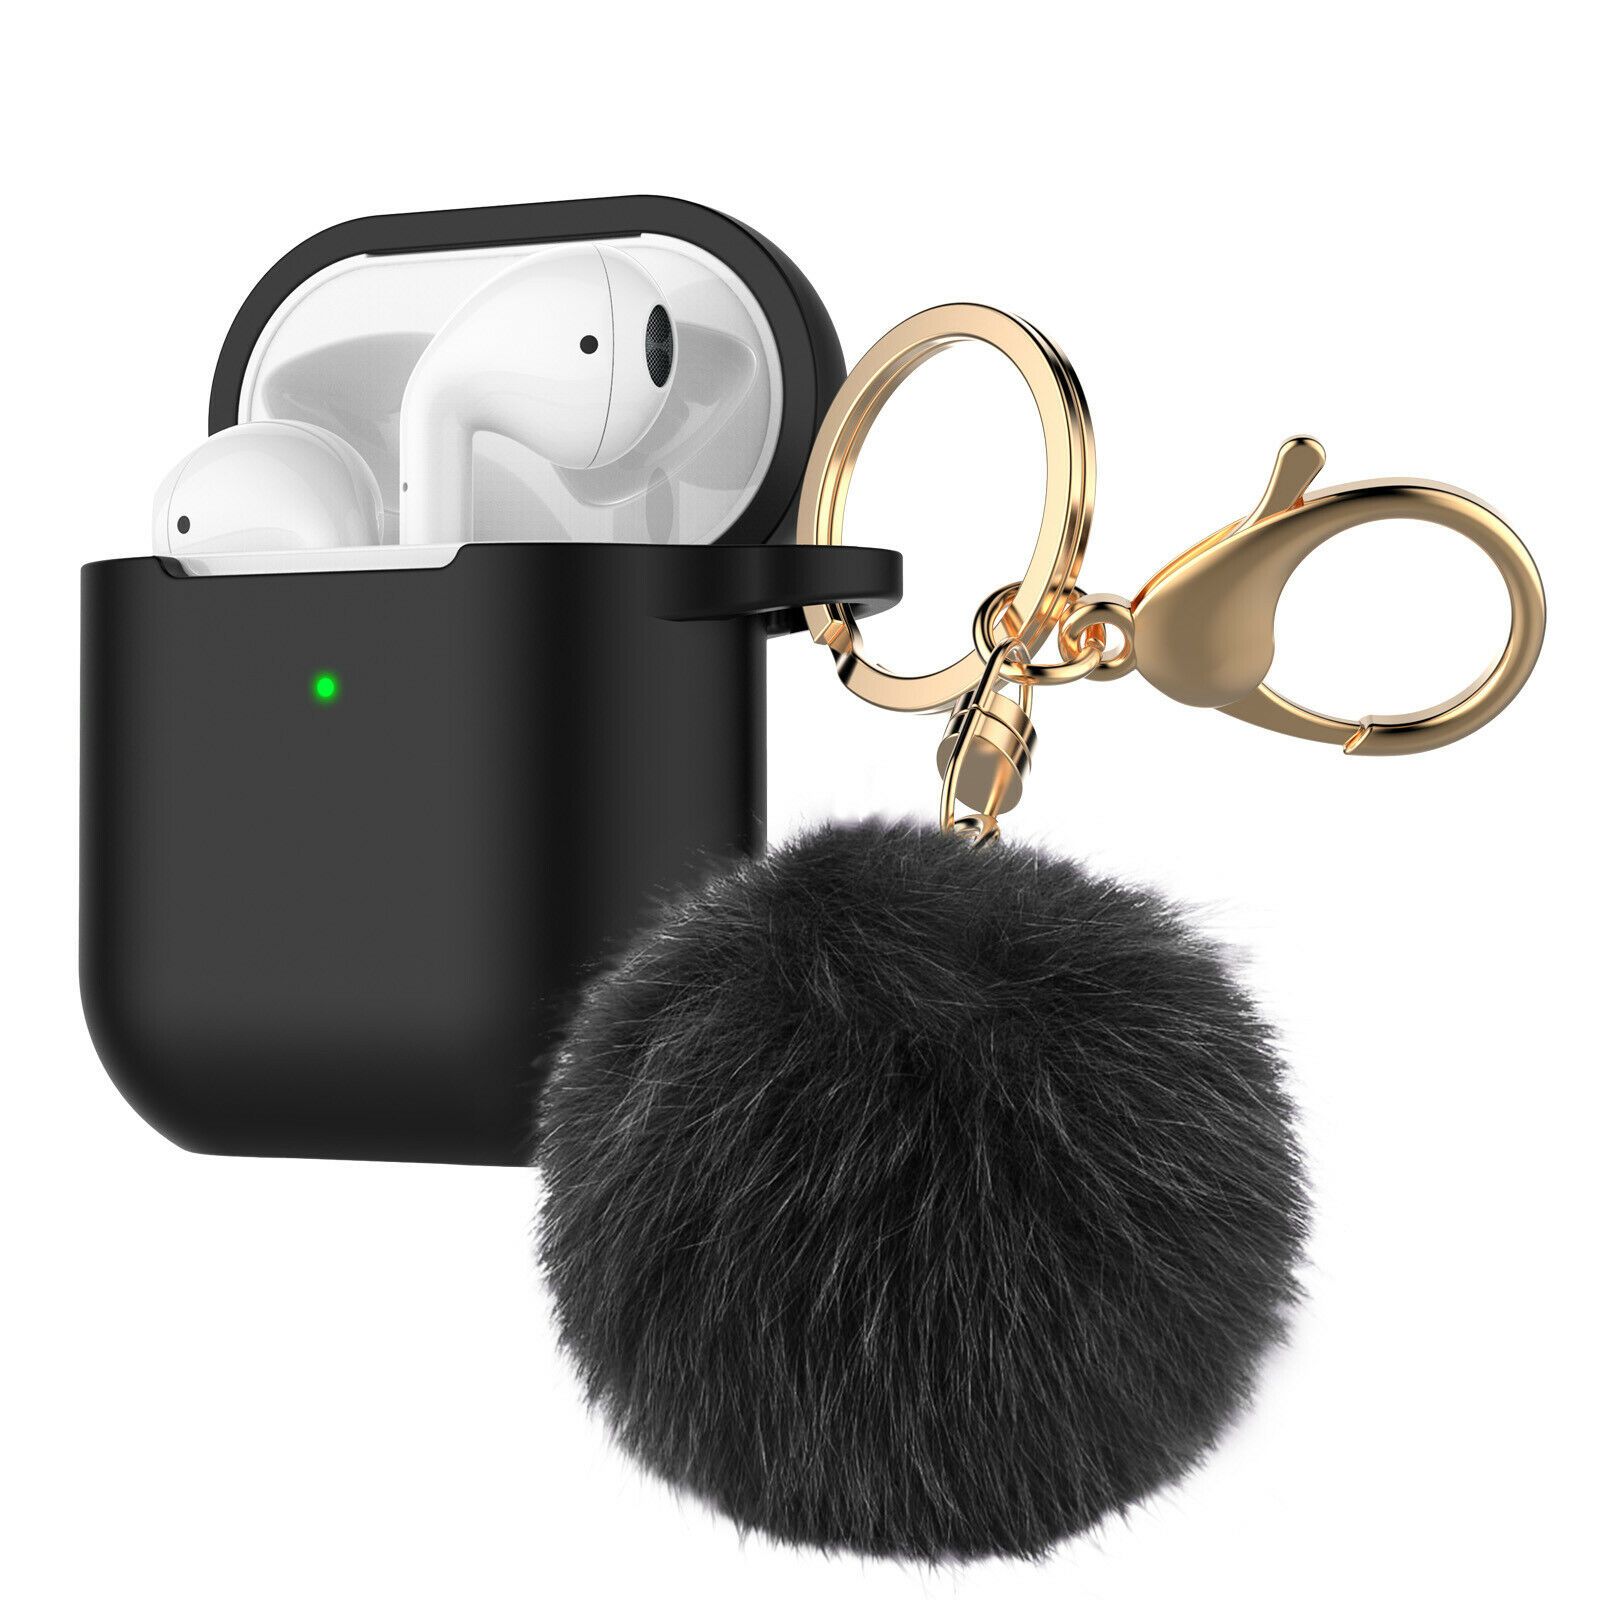 Airpods Silicone Charging Case Cover Fur Ball Keychain For Apple AirPods 1/2 Airpods Case hellotecusa Black 